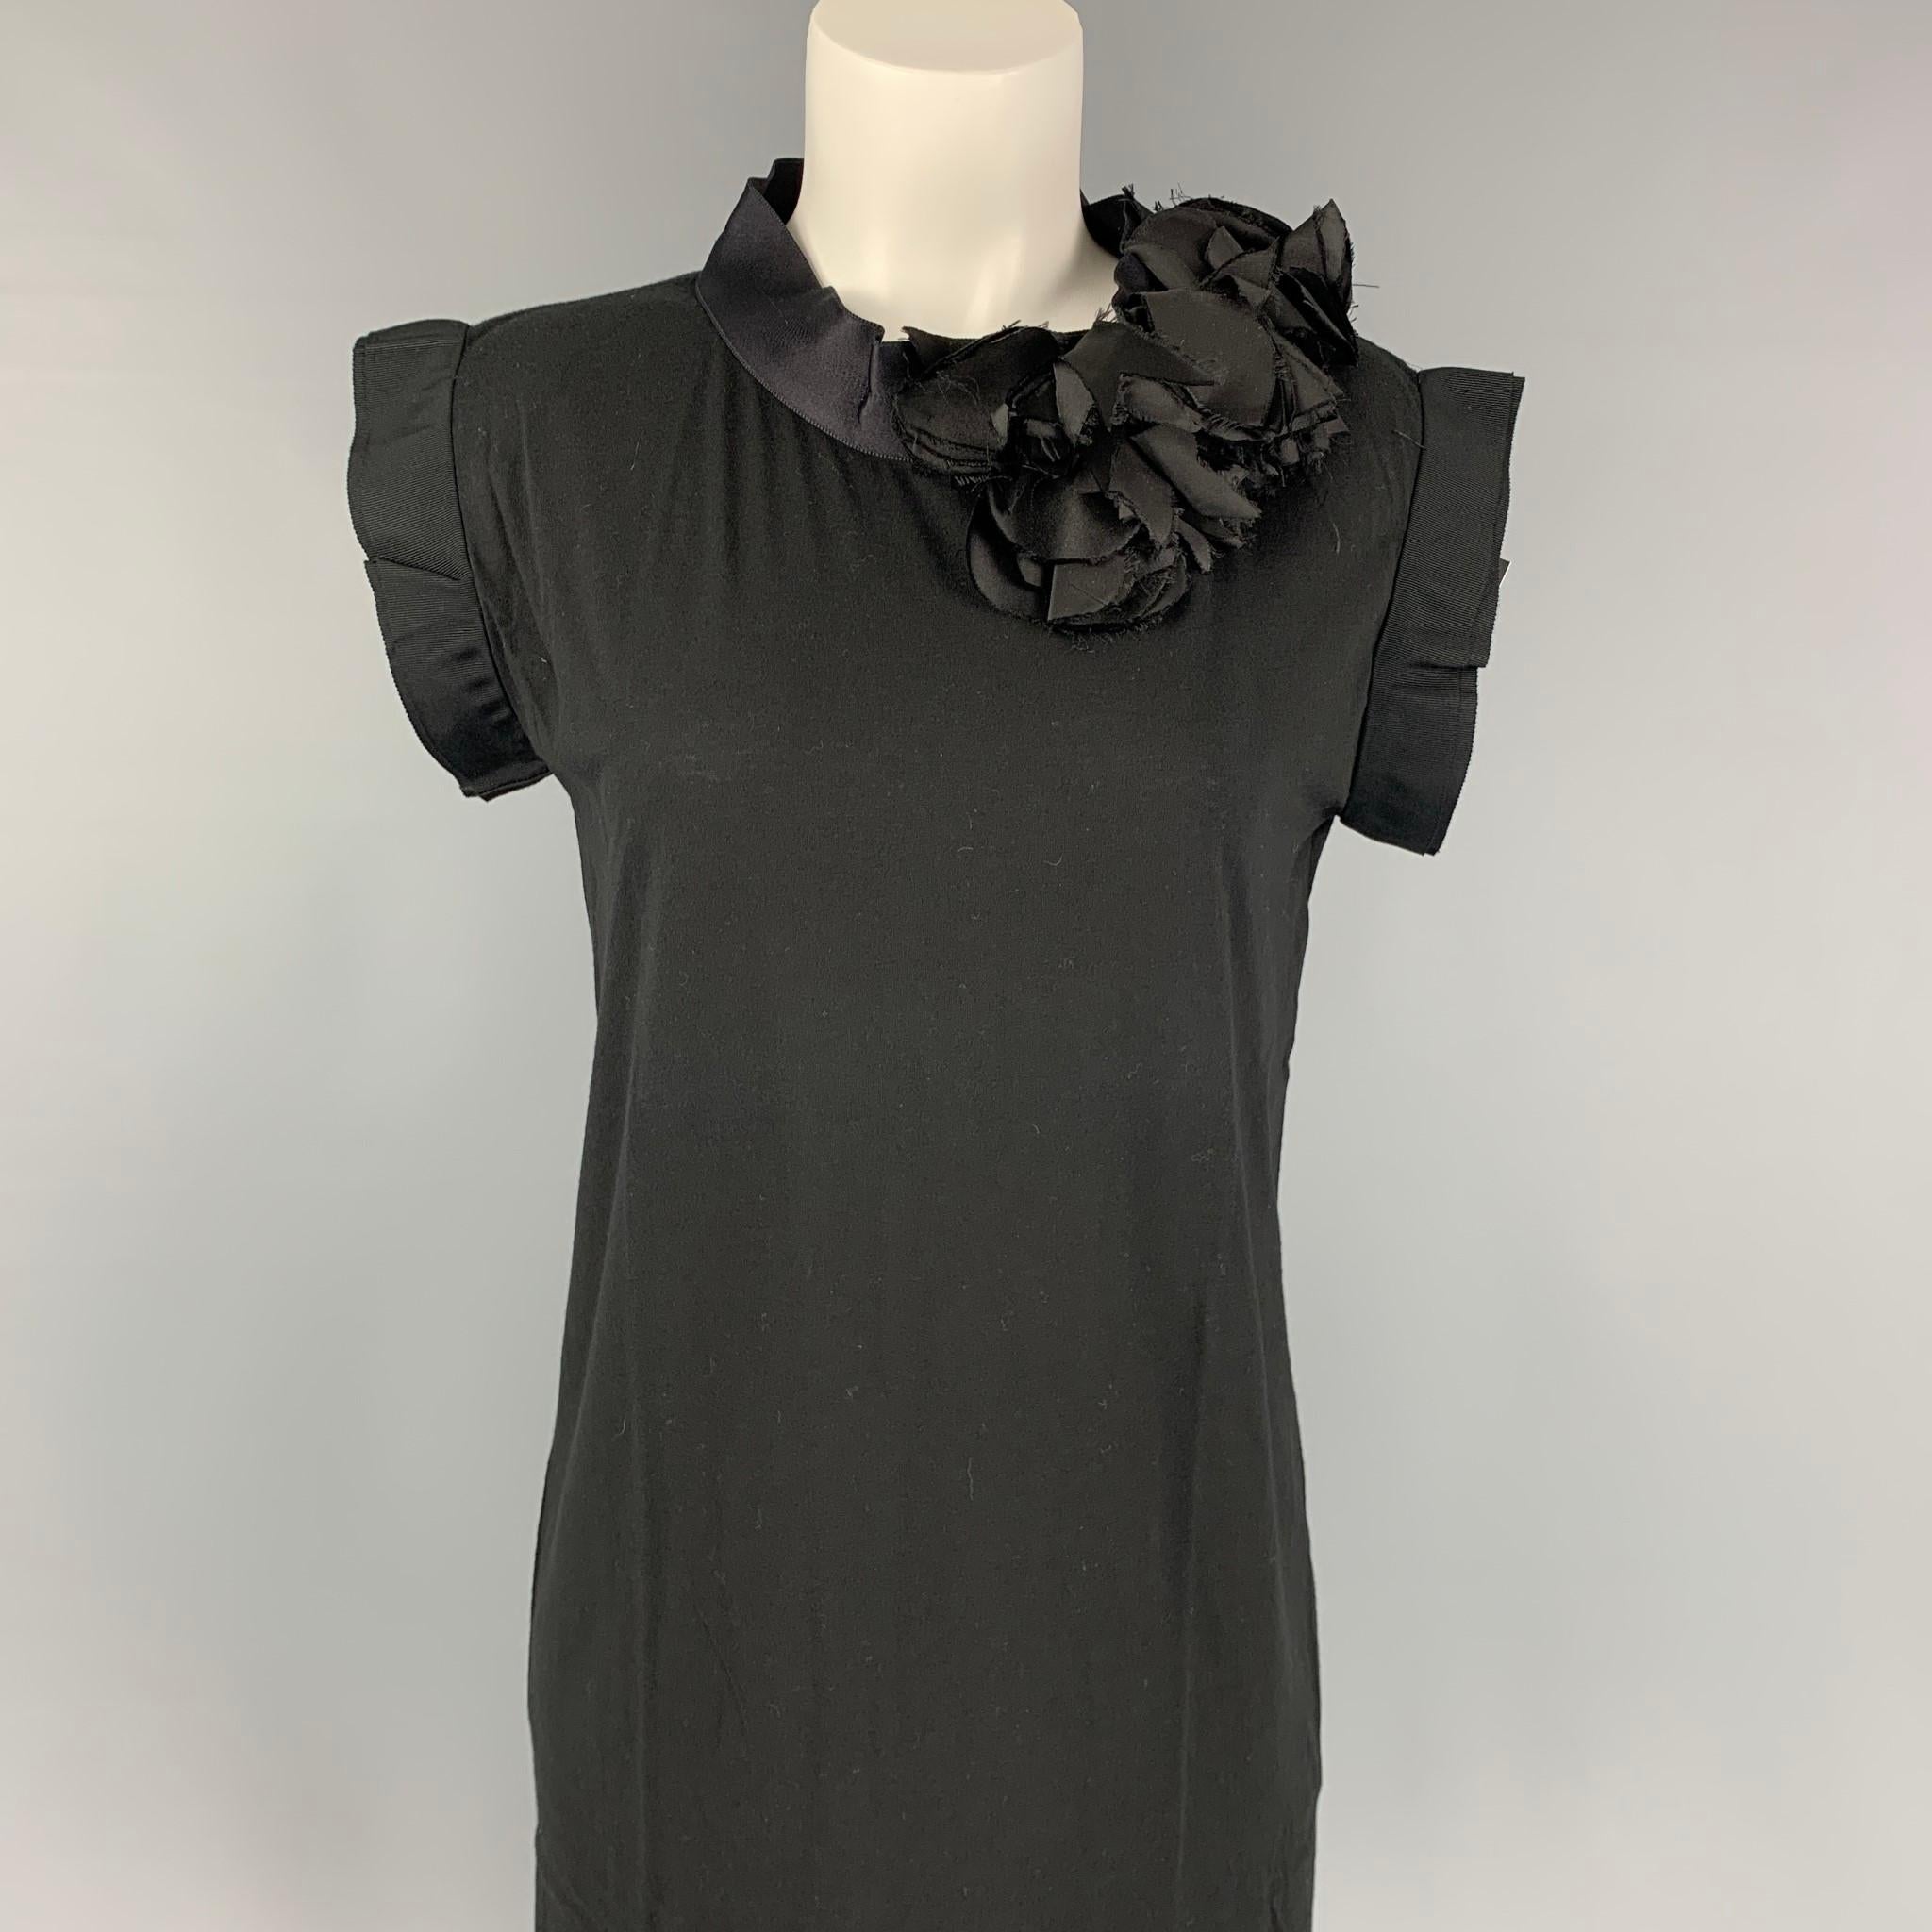 LANVIN dress comes in a black cotton featuring a shift style, sleeveless, ribbon trim, and silk flower details. 

Very Good Pre-Owned Condition.
Marked: Size tag removed.

Measurements:

Shoulder: 16.5 in.
Bust: 36 in.
Waist: 38 in.
Length: 37 in. 